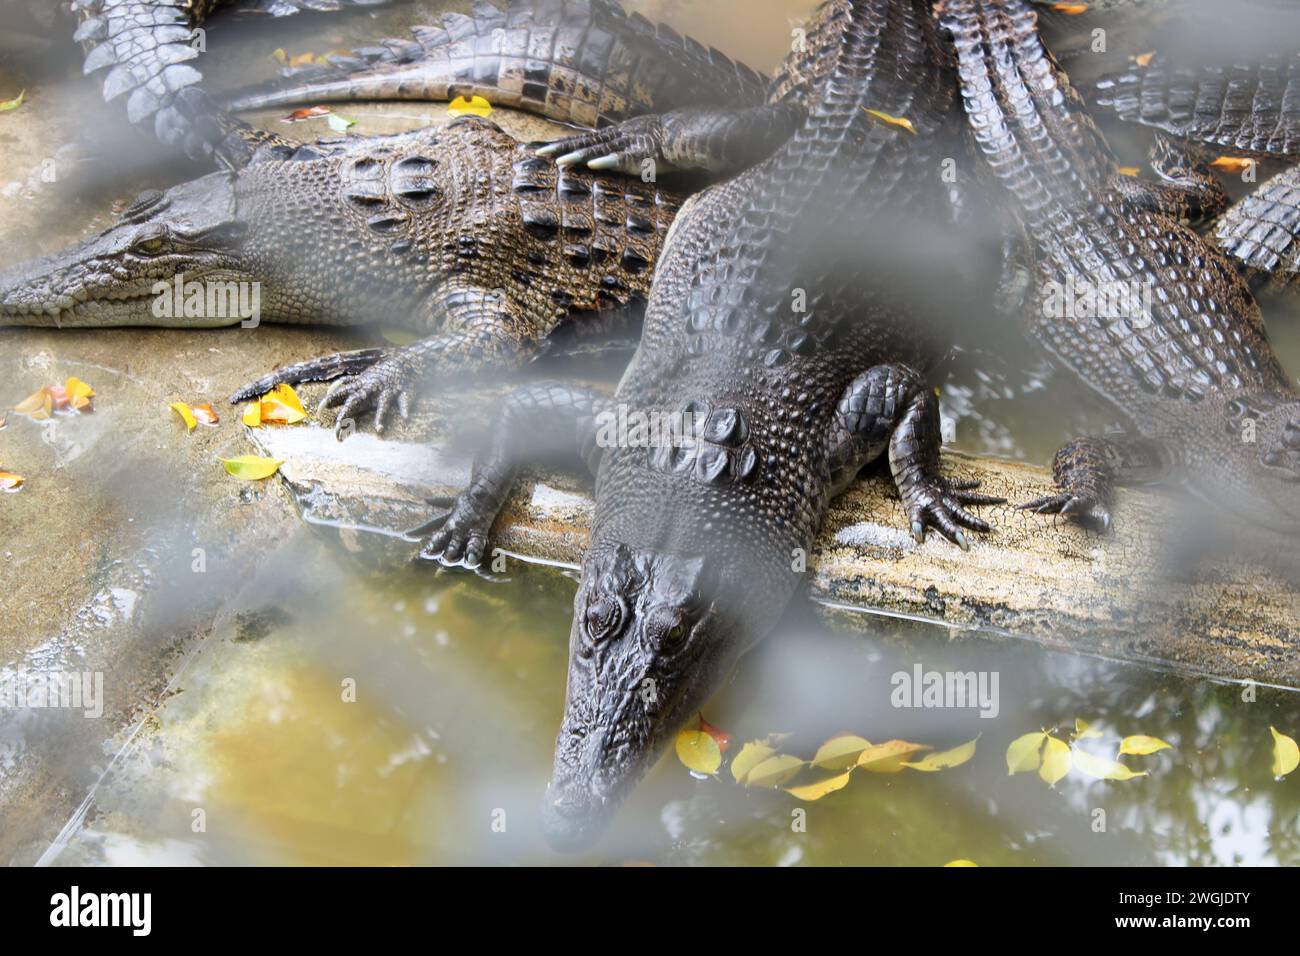 Flock of alligators in an aviary at the zoo. Stock Photo